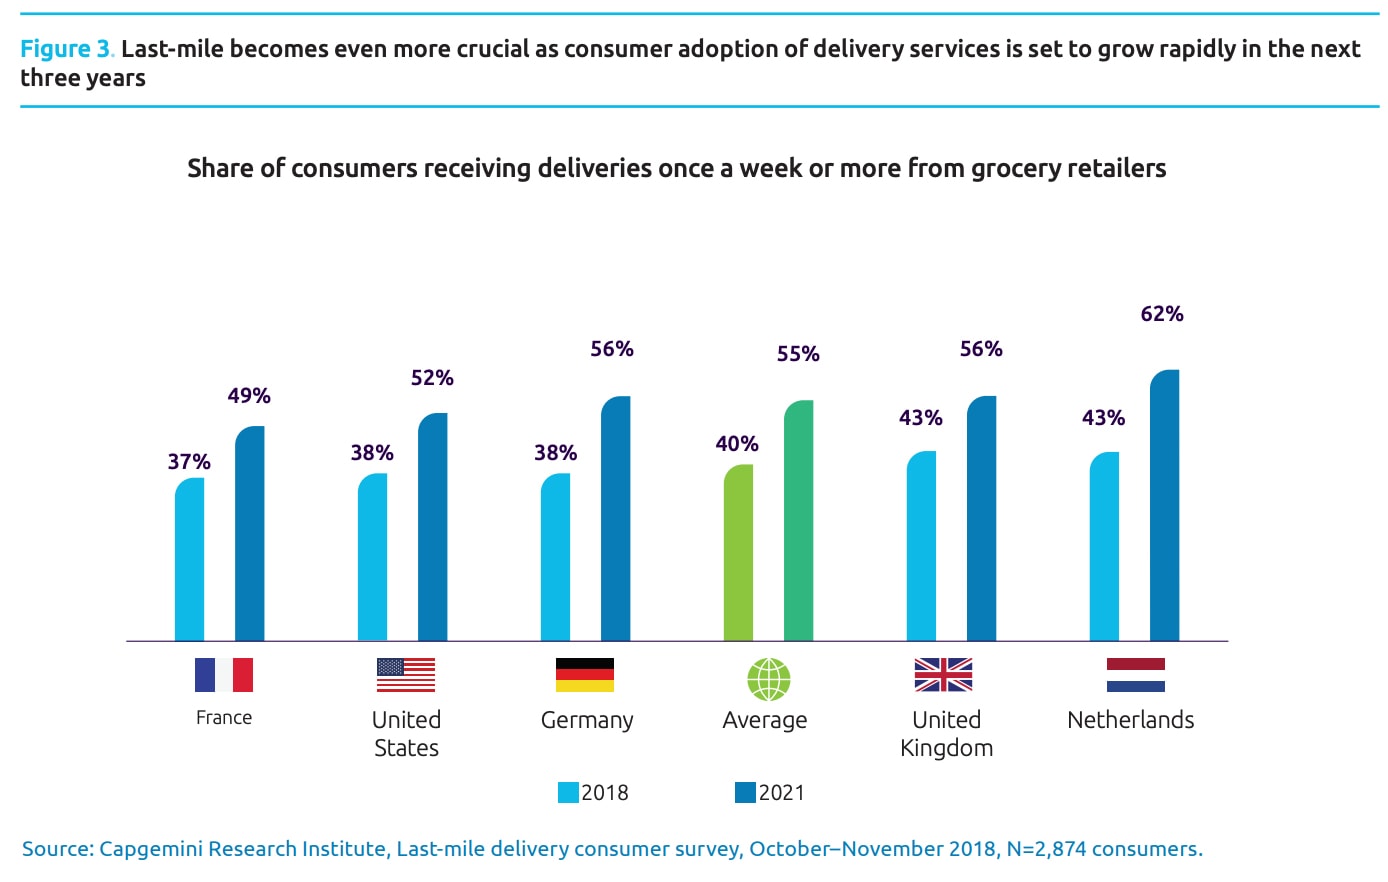 bar chart showing the percentage of consumers receiving deliveries once a week or more from grocery retailers in 2018 and 2021